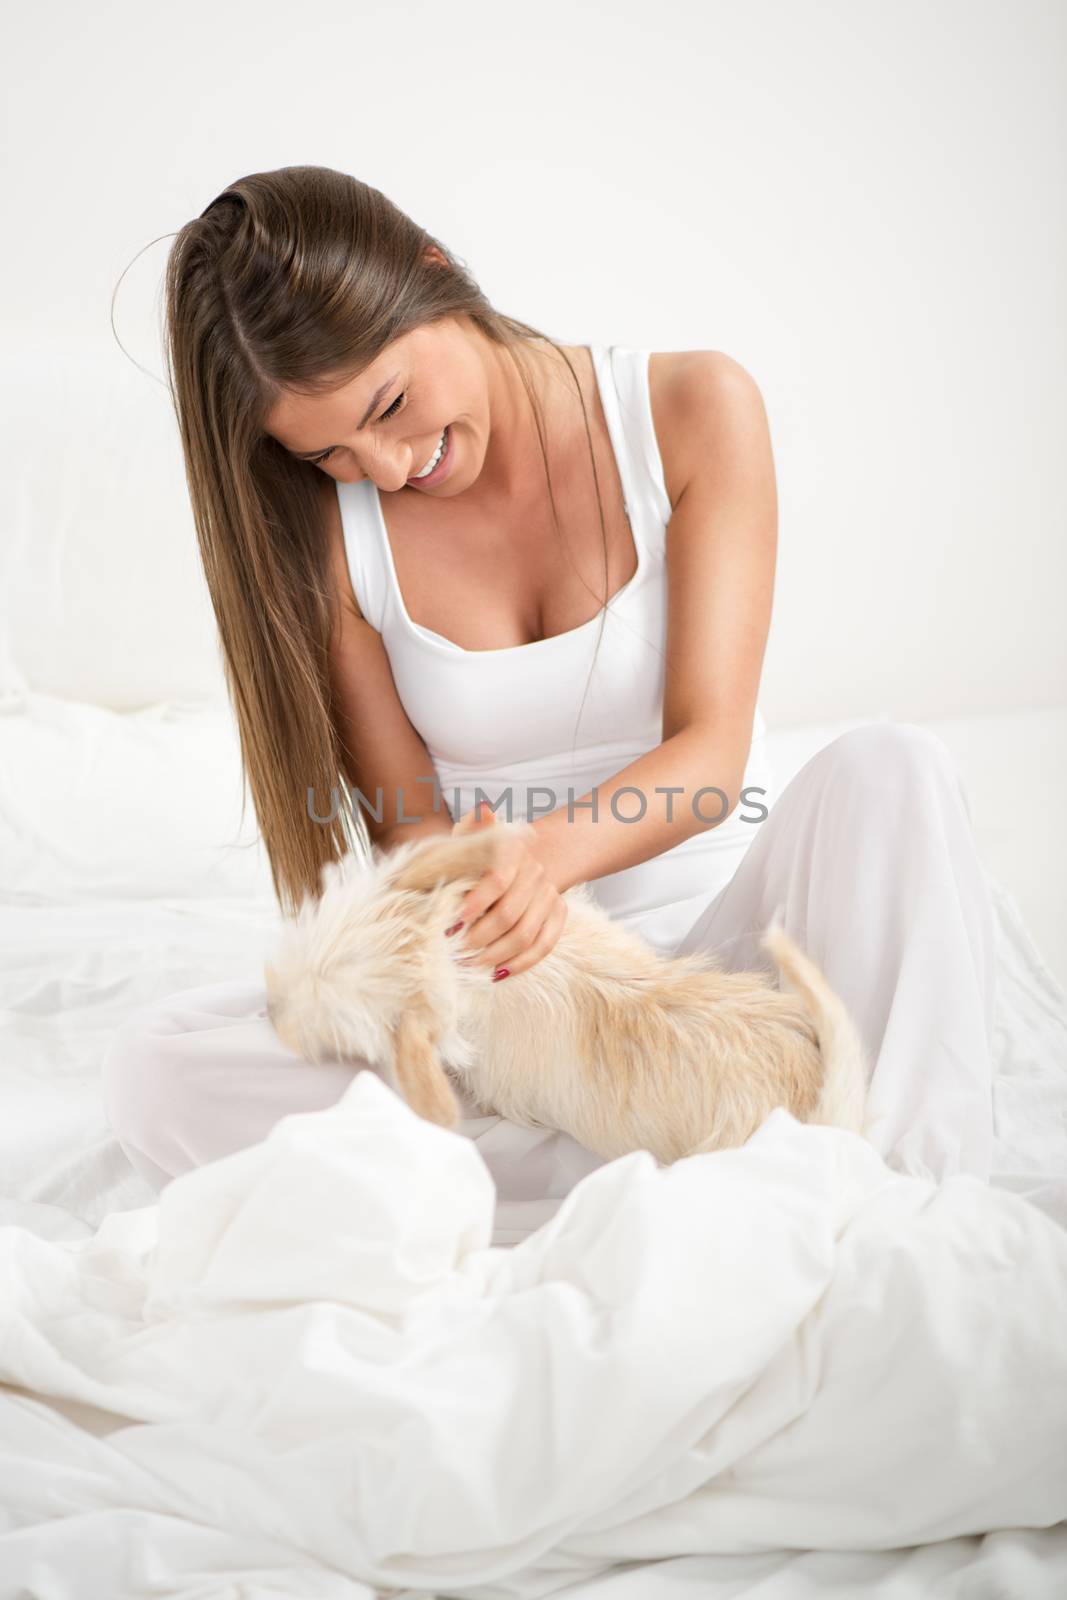 Cute Girl And Dog In The Morning by MilanMarkovic78